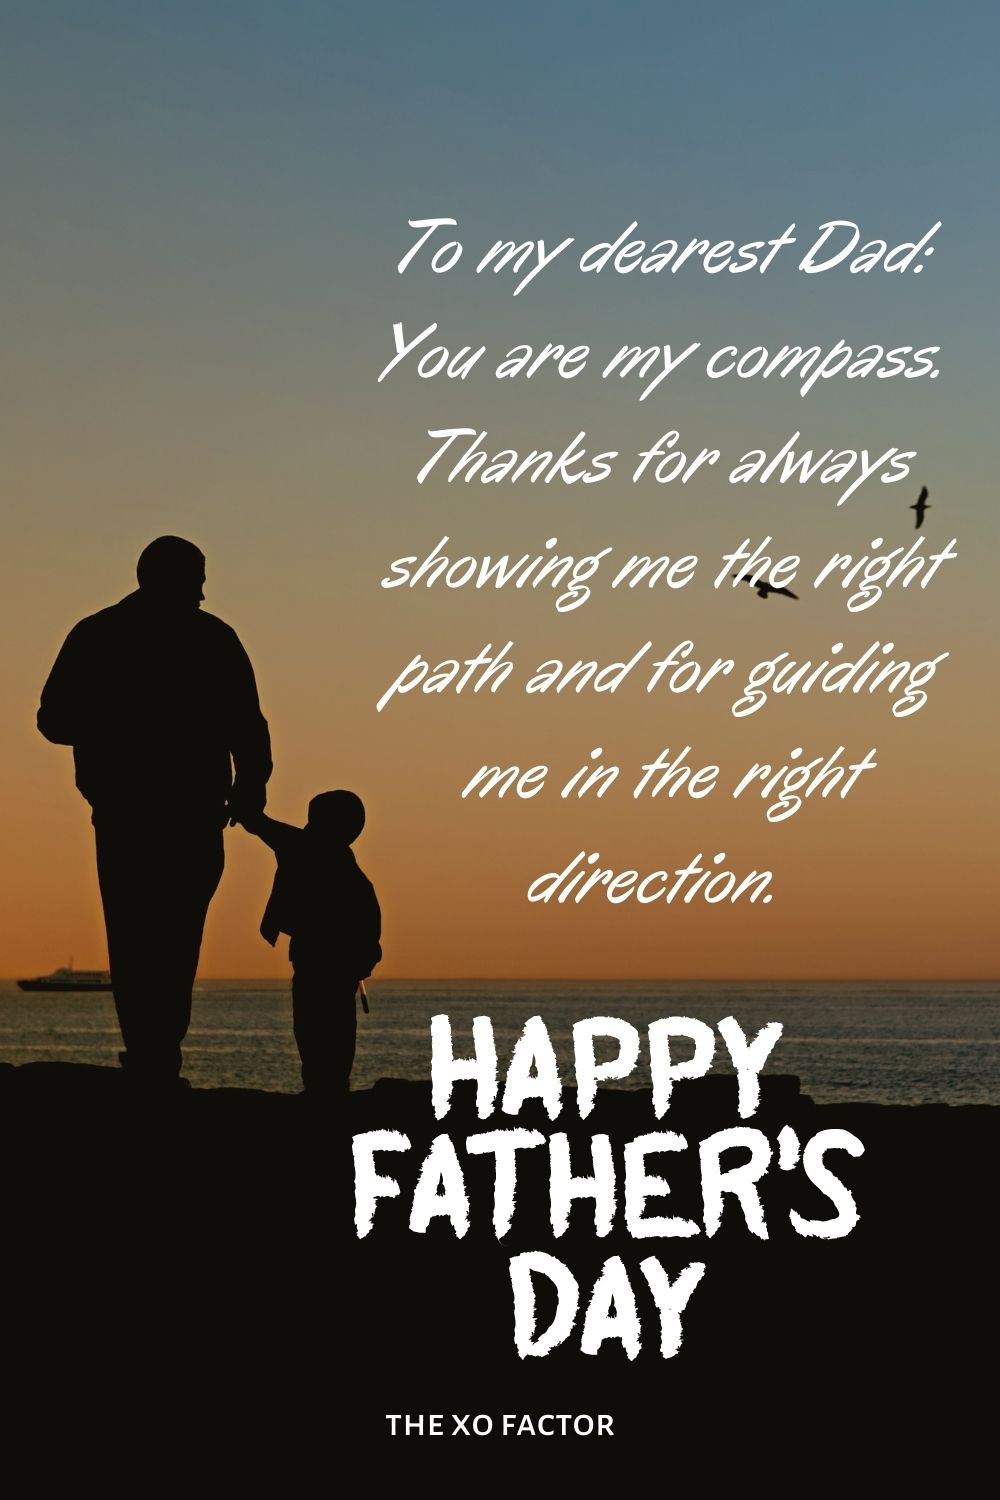 To my dearest Dad: You are my compass. Thanks for always showing me the right path and for guiding me in the right direction. Happy father’s day, I love you.